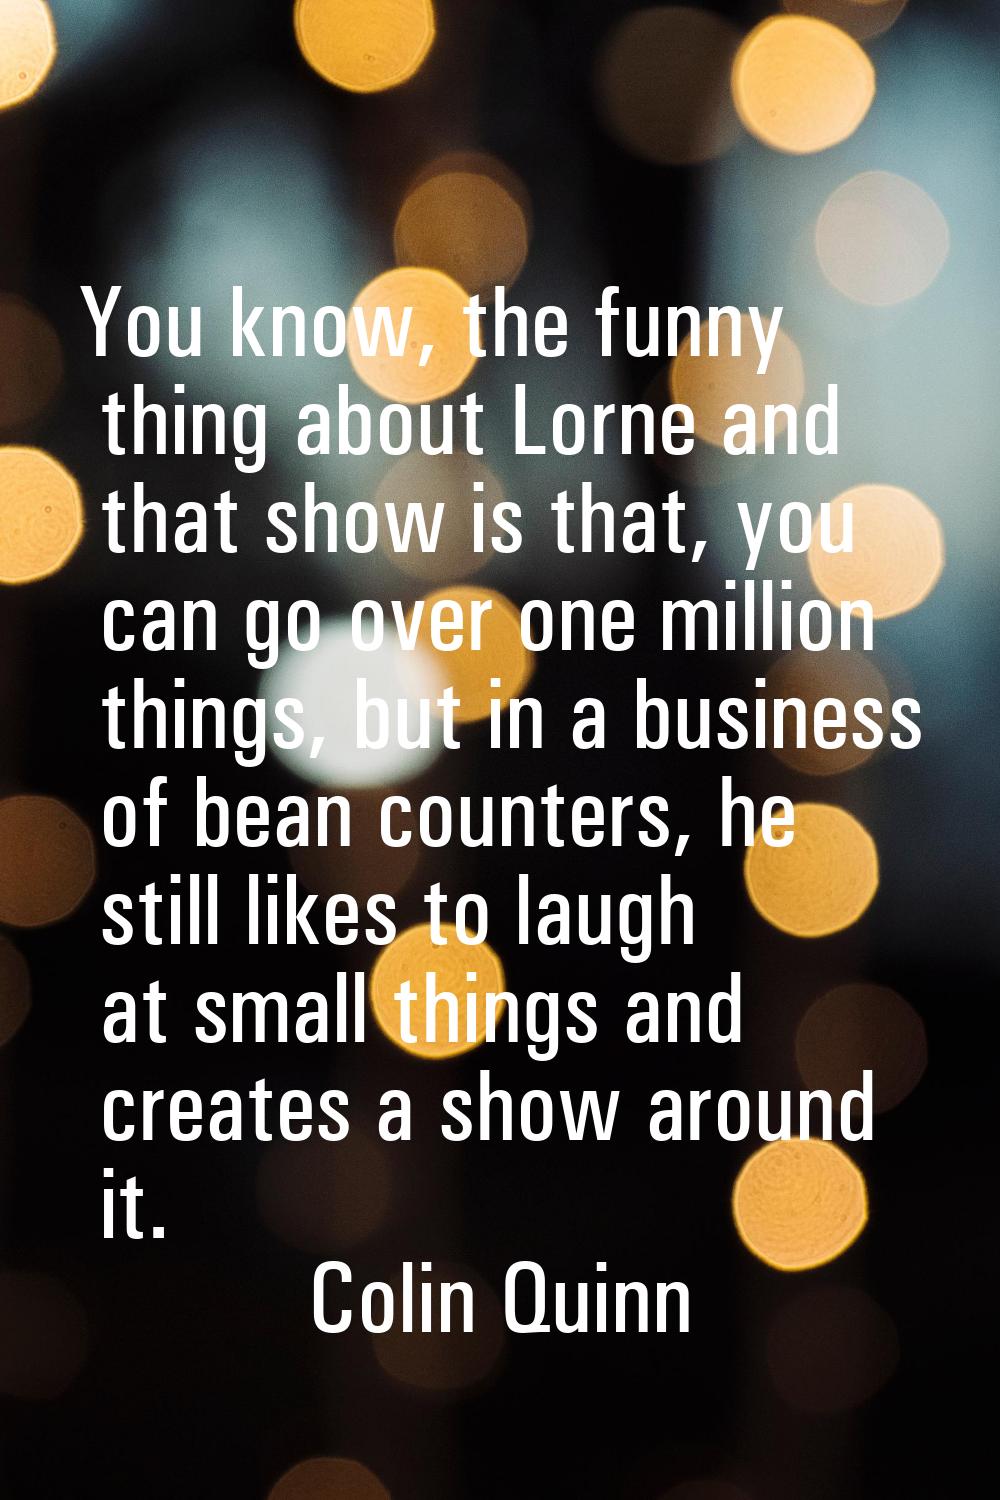 You know, the funny thing about Lorne and that show is that, you can go over one million things, bu